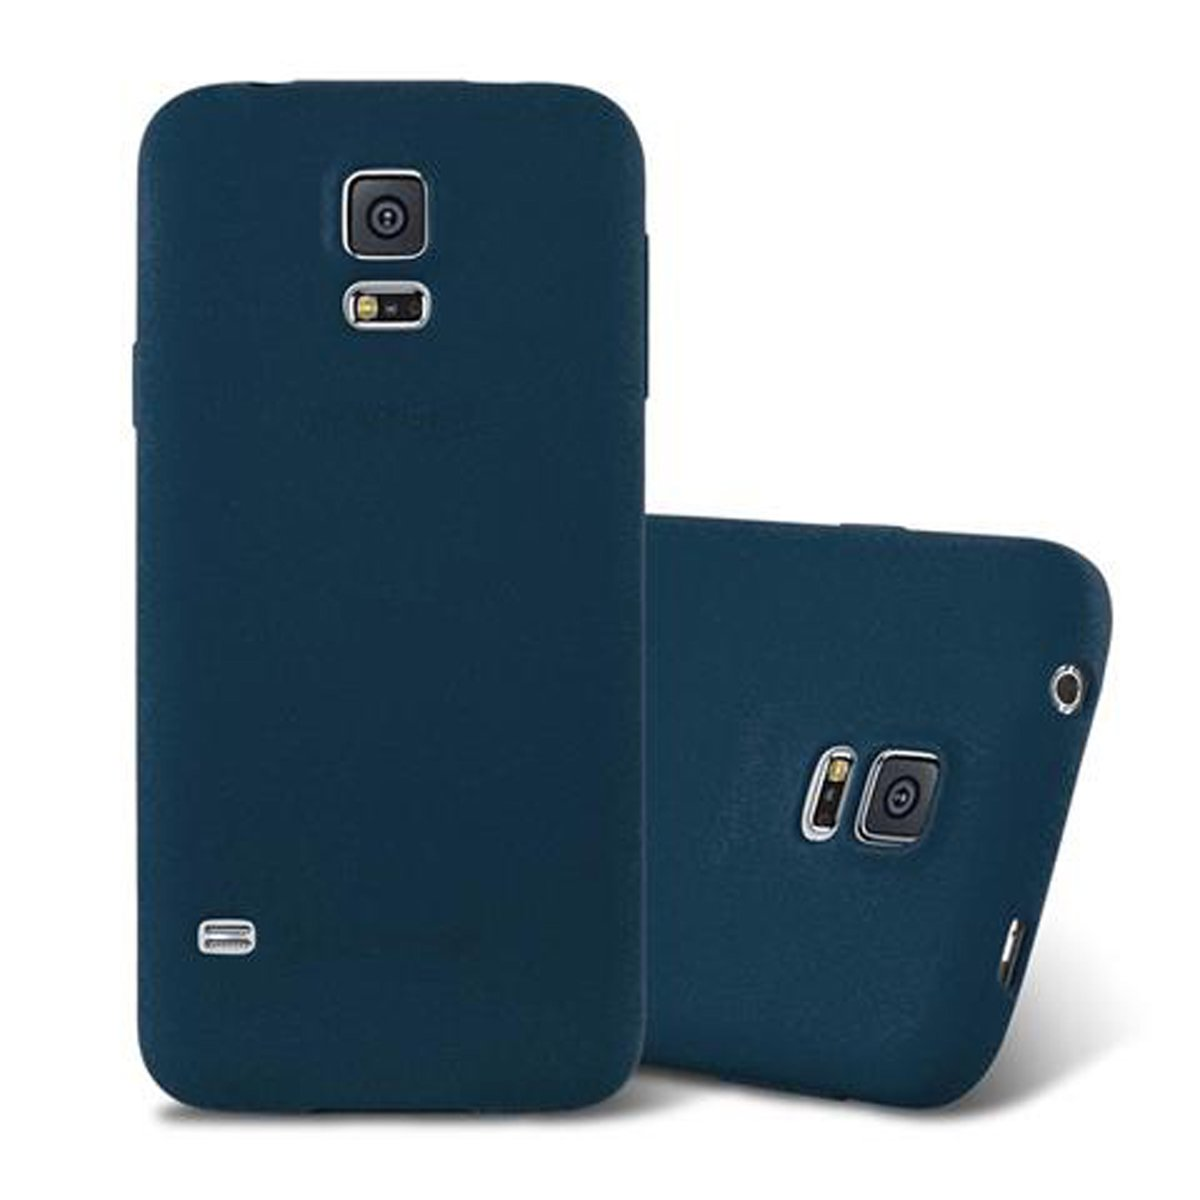 NEO, DUNKEL Samsung, BLAU Frosted CADORABO Galaxy Backcover, FROST S5 TPU S5 Schutzhülle, /